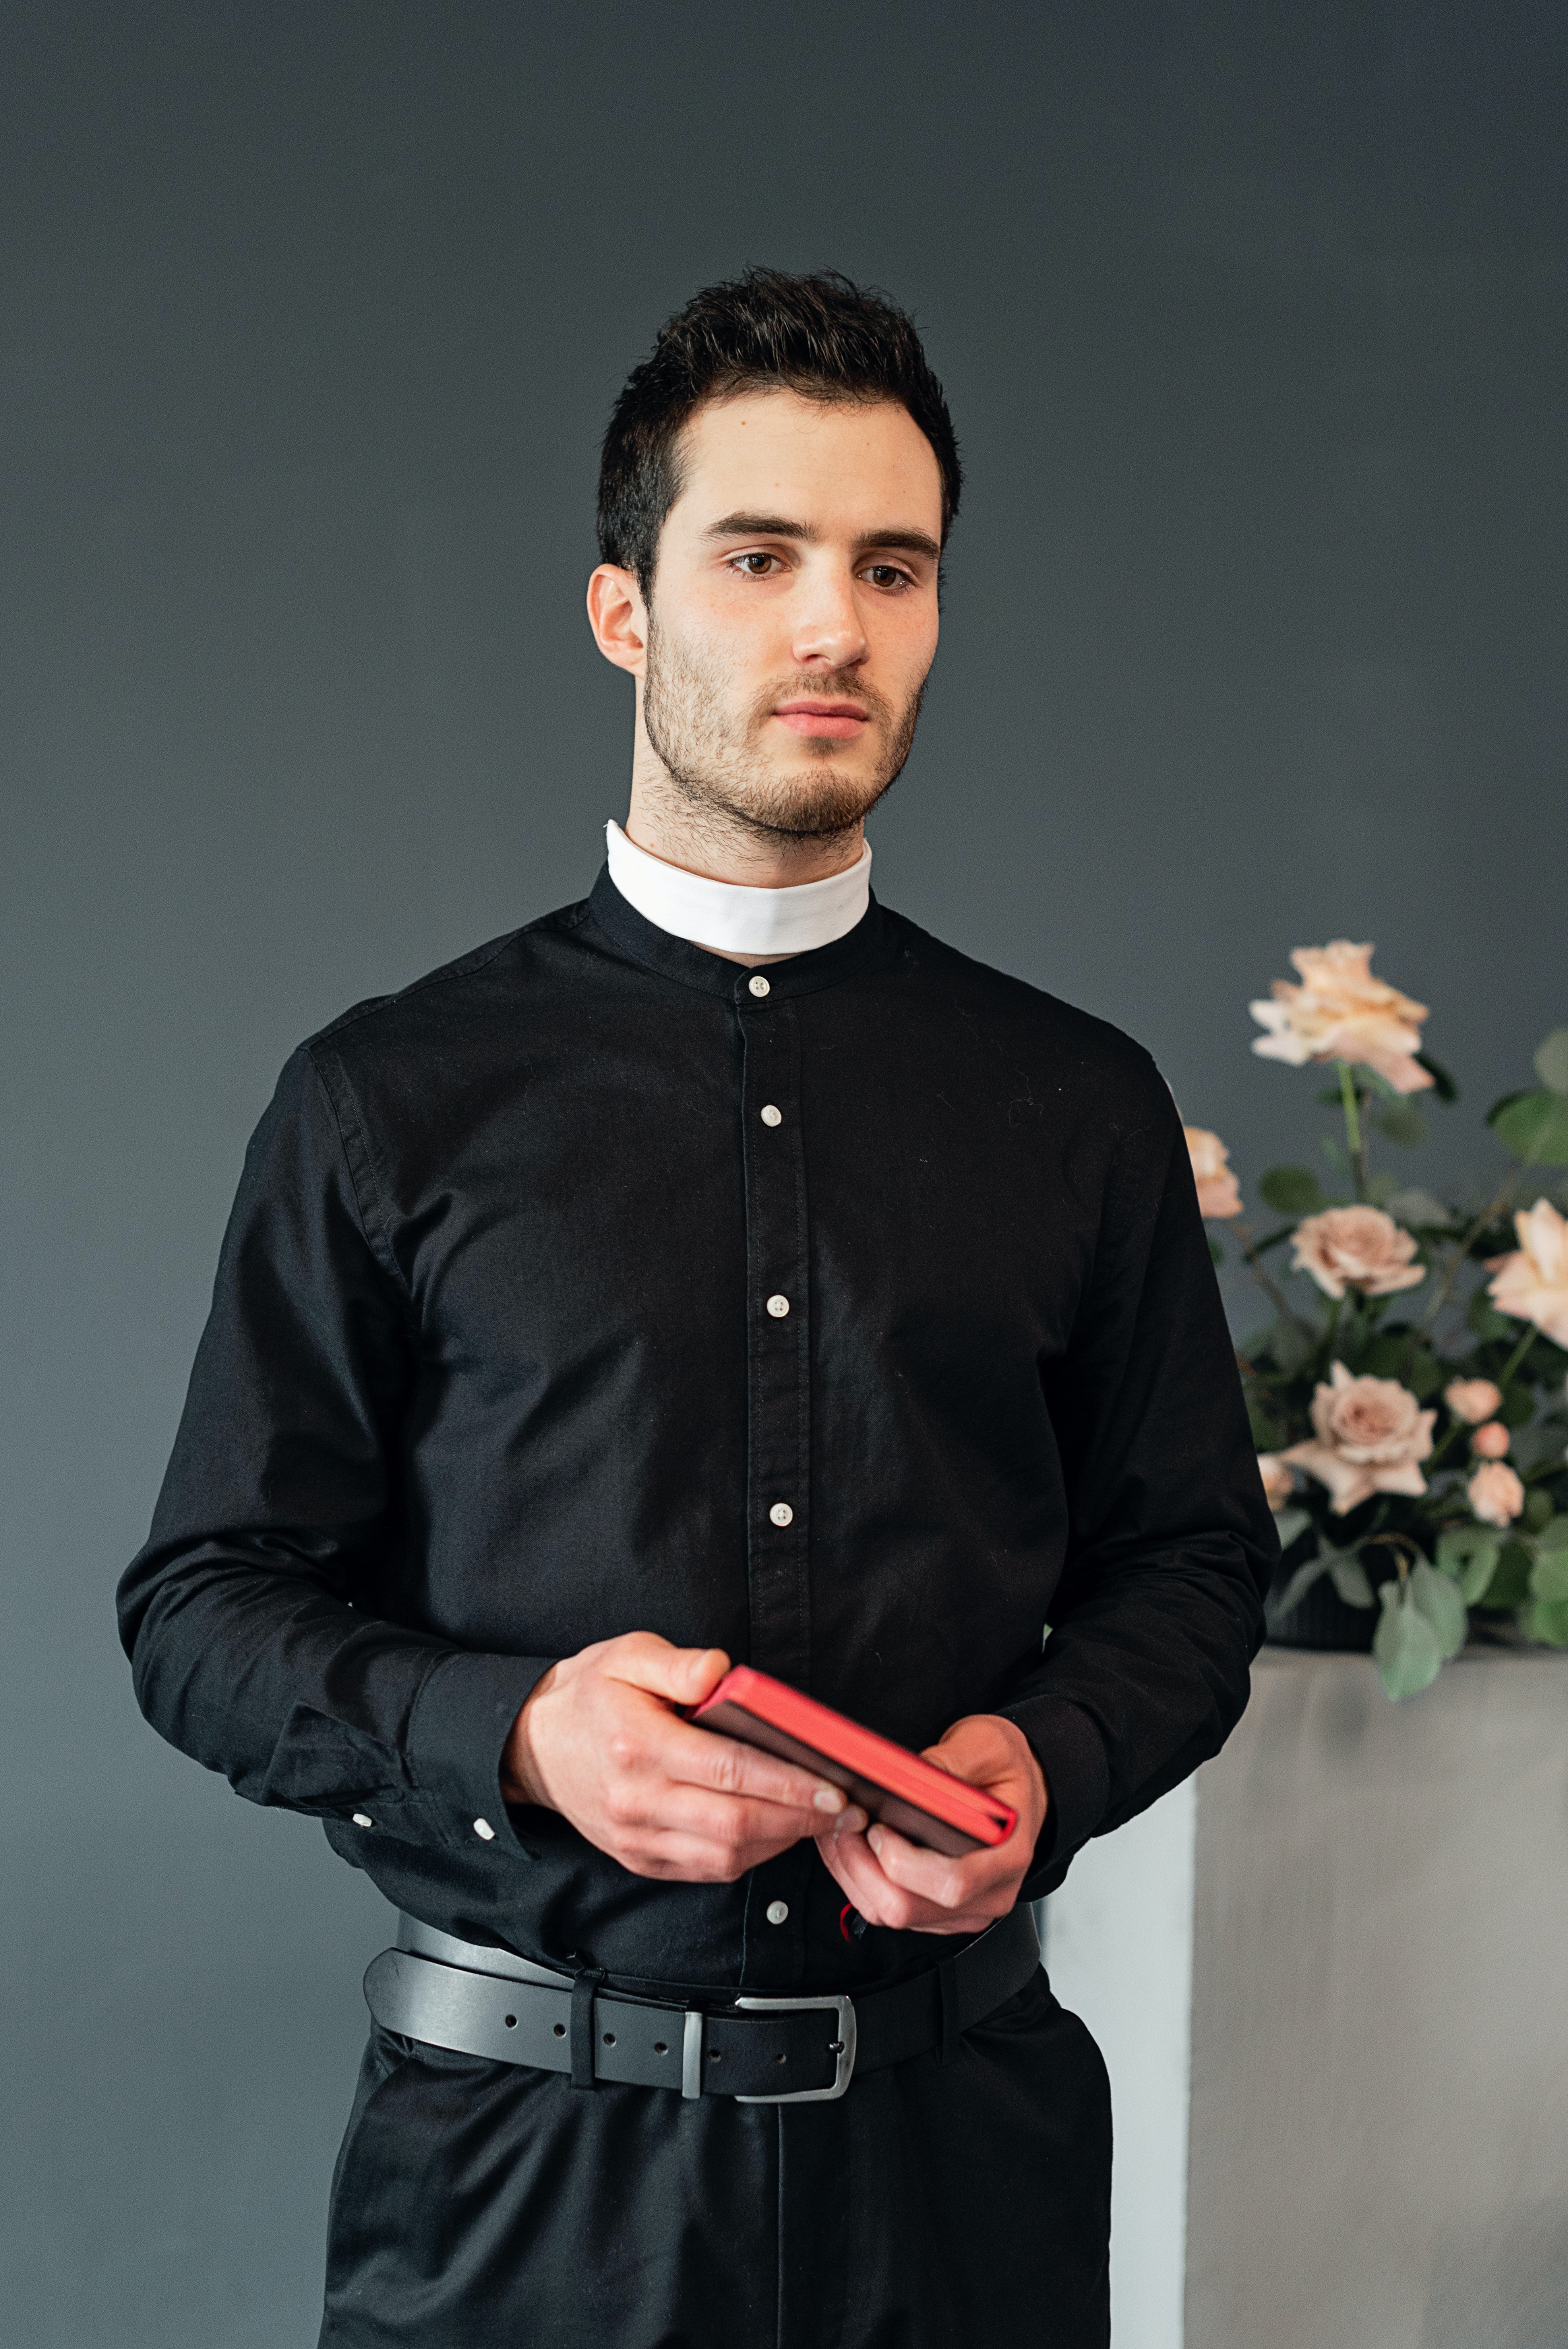 A priest standing with a Bible in his hands. | Photo: Pexels/ Mikhail Nilov